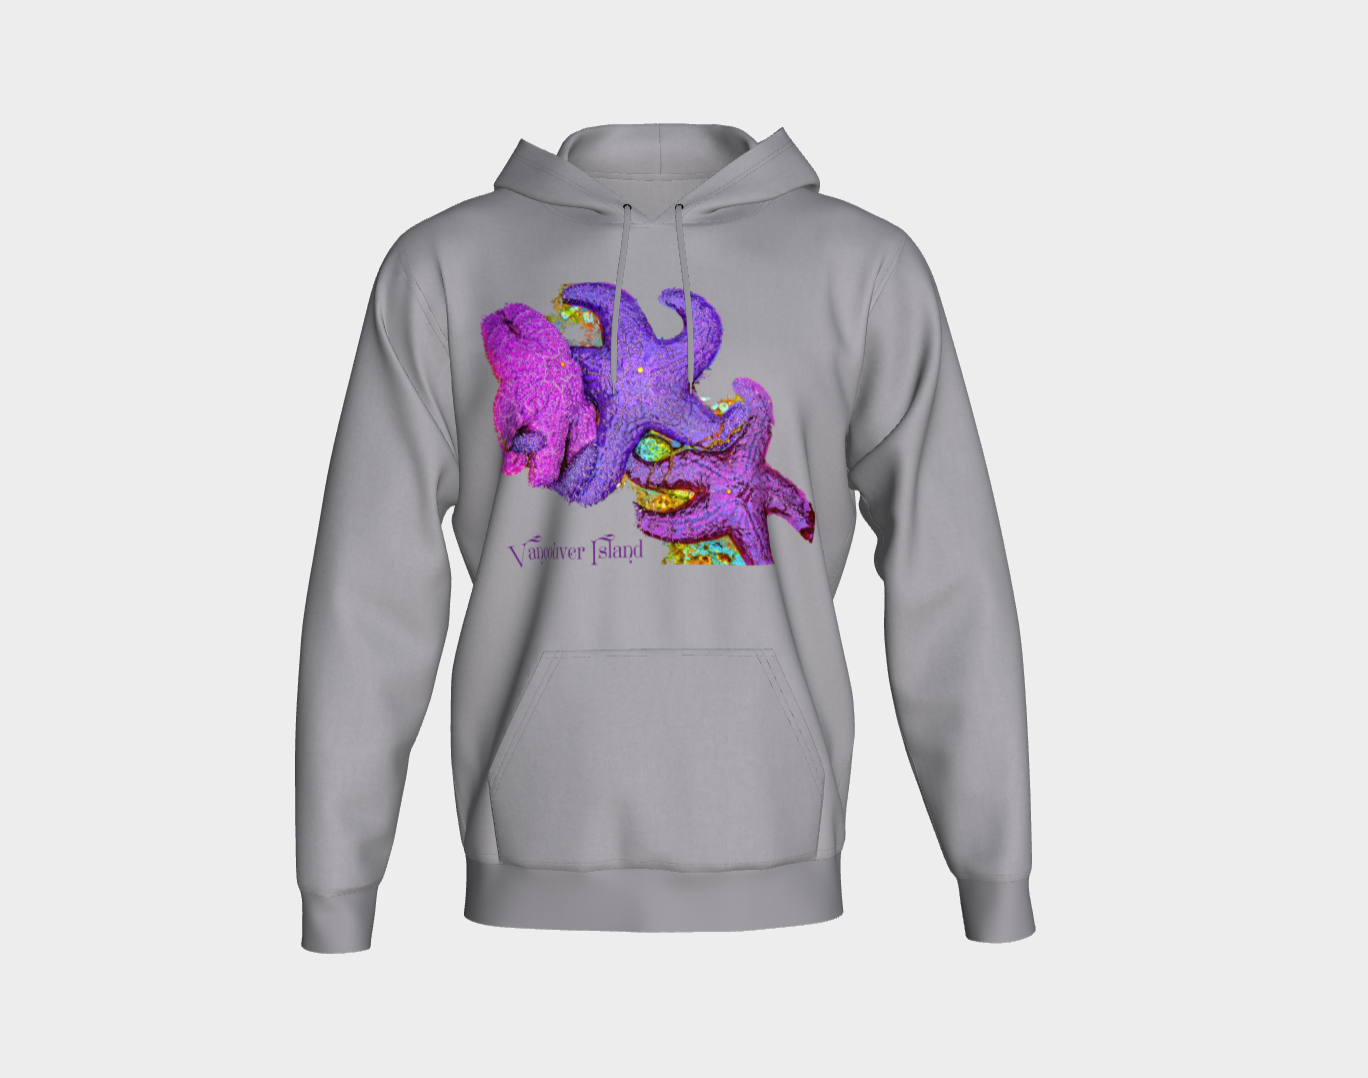 Starfish Cluster Vancouver Island Unisex Pullover Hoodie Your Van Isle Goddess unisex pullover hoodie is a great classic hoodie!  Created with state of the art tri-tex material which is a non-shrink poly middle encased in two layers of ultra soft cotton face and lining.